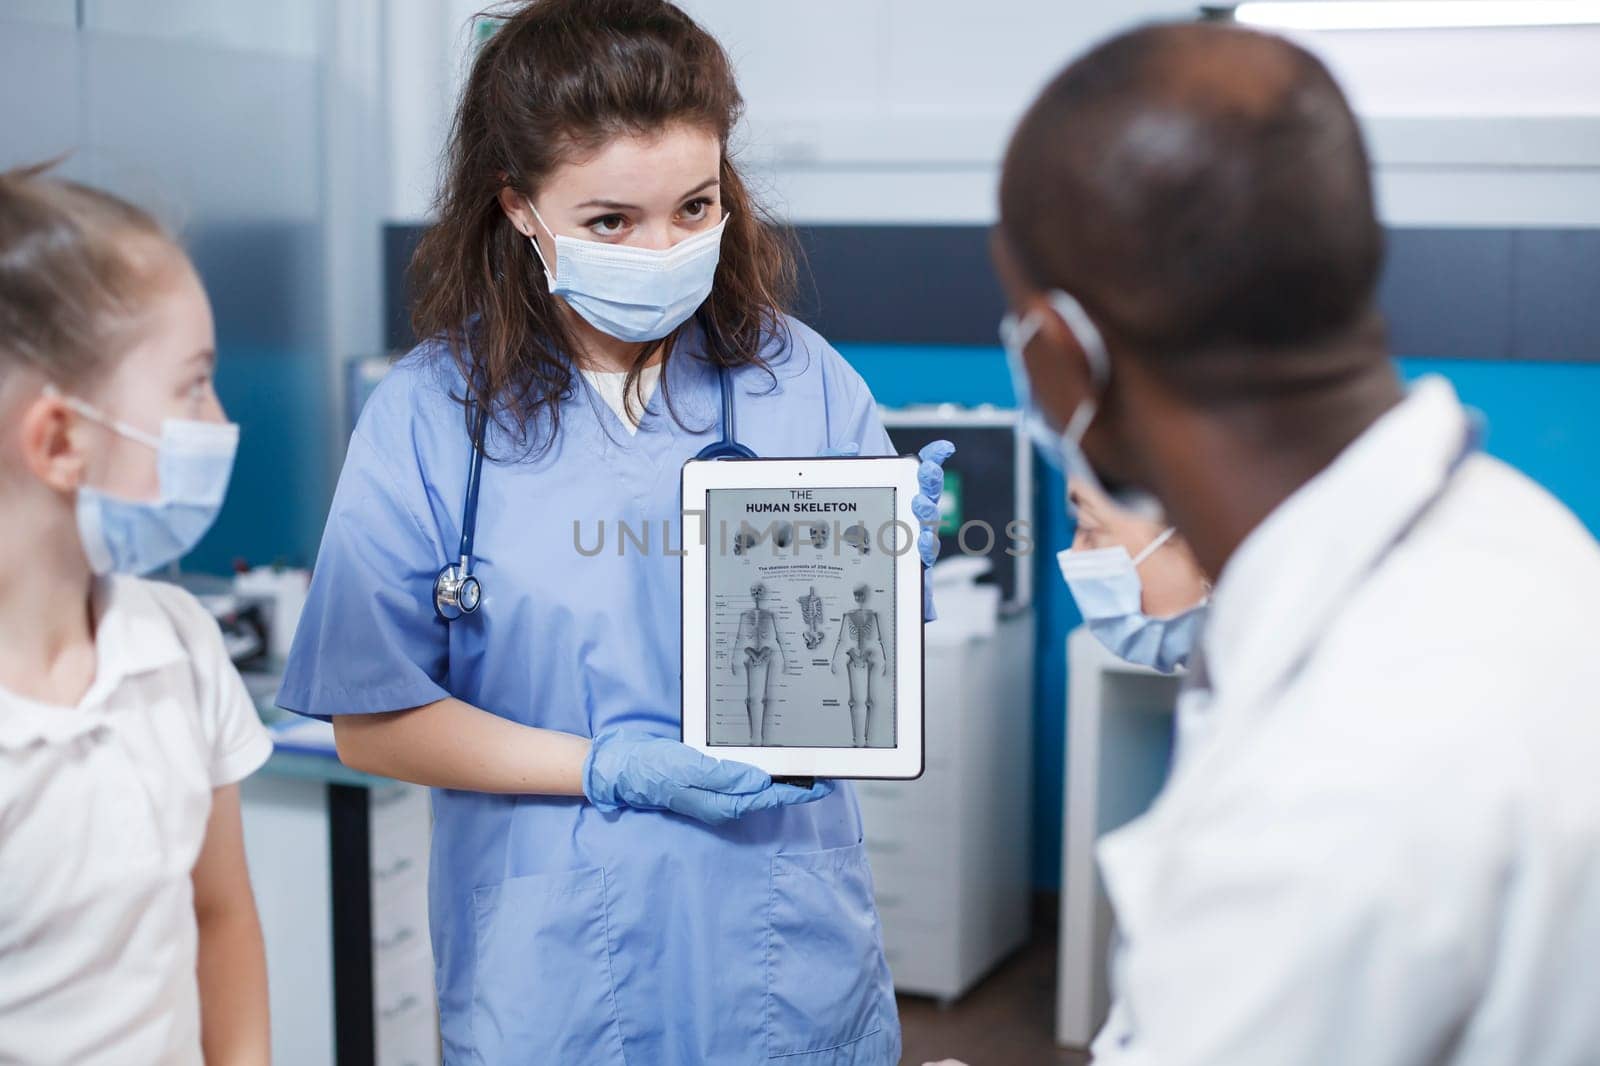 During a visit, bone doctor and nurse discuss the best medical alternatives for the patient in the clinic office. A doctor in antibacterial protective gear displays orthopedic information on a tablet.